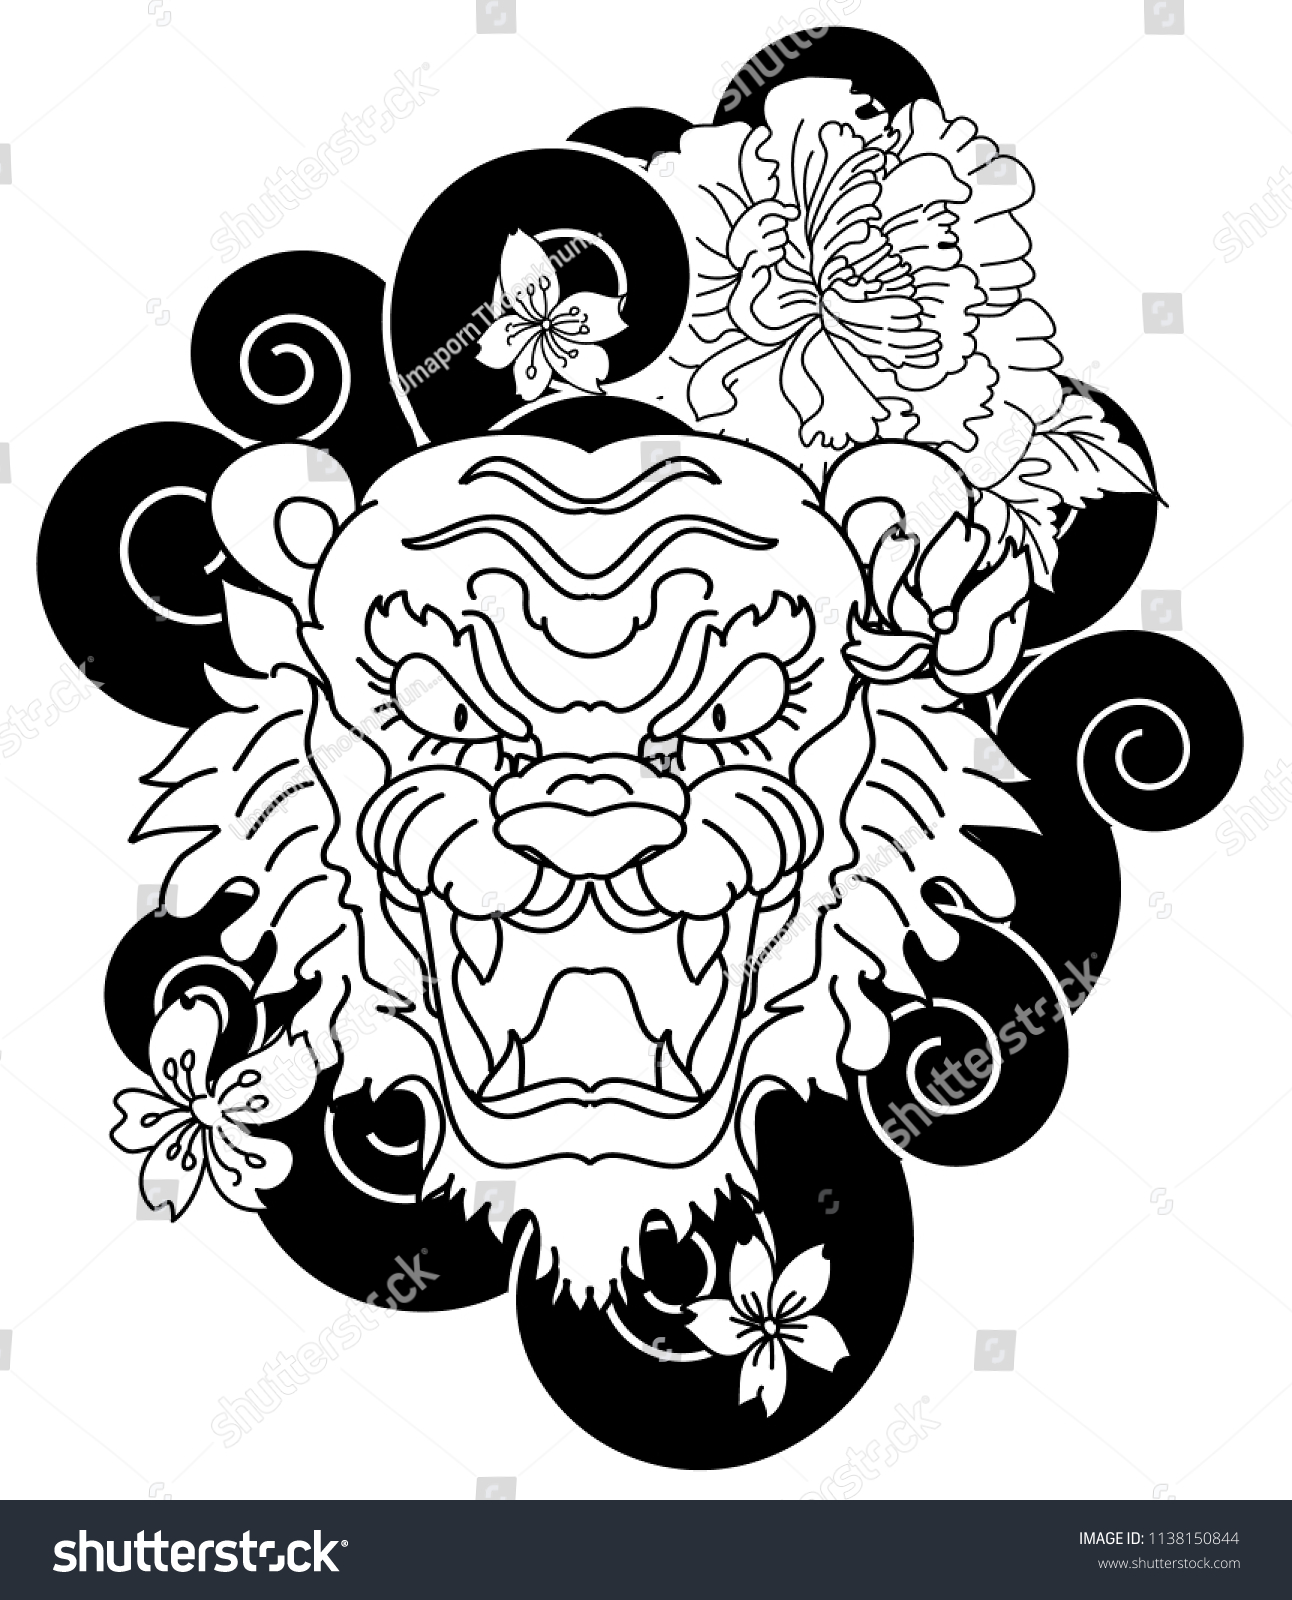 Tiger Peony Marigold Flower On Cloud Stock Vector Royalty Free